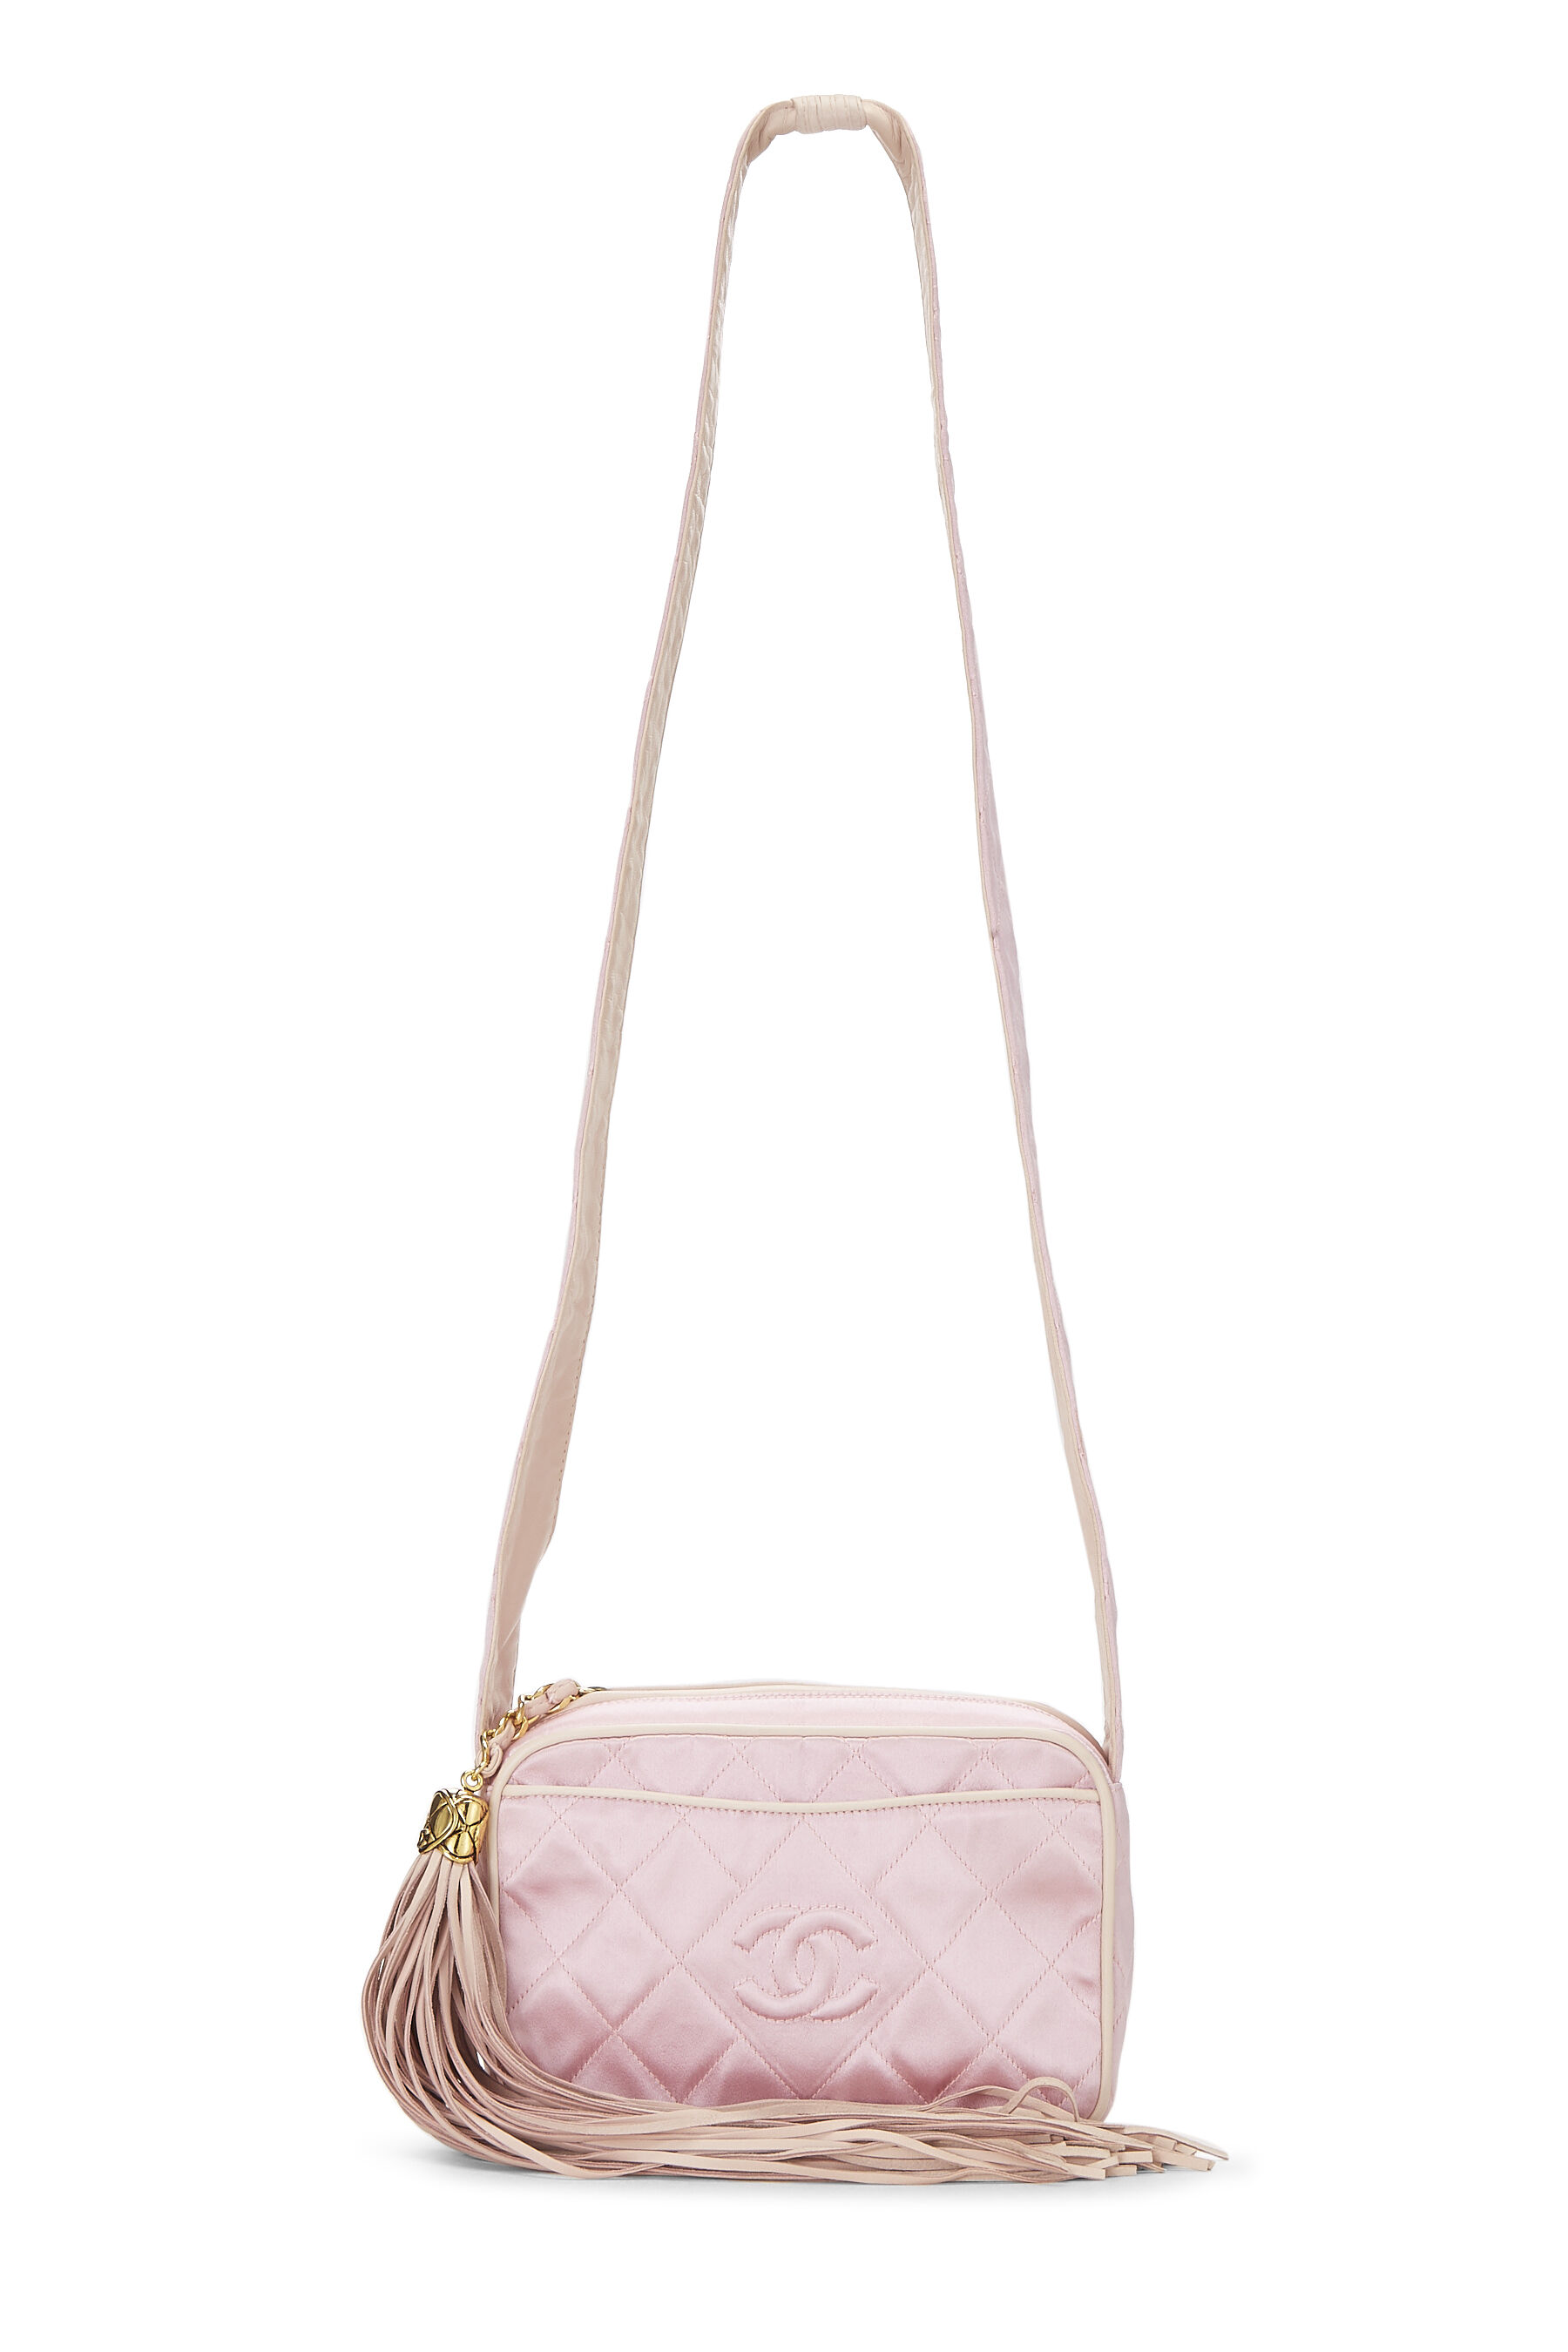 Chanel Pink Quilted Satin 'CC' Shoulder Bag Small